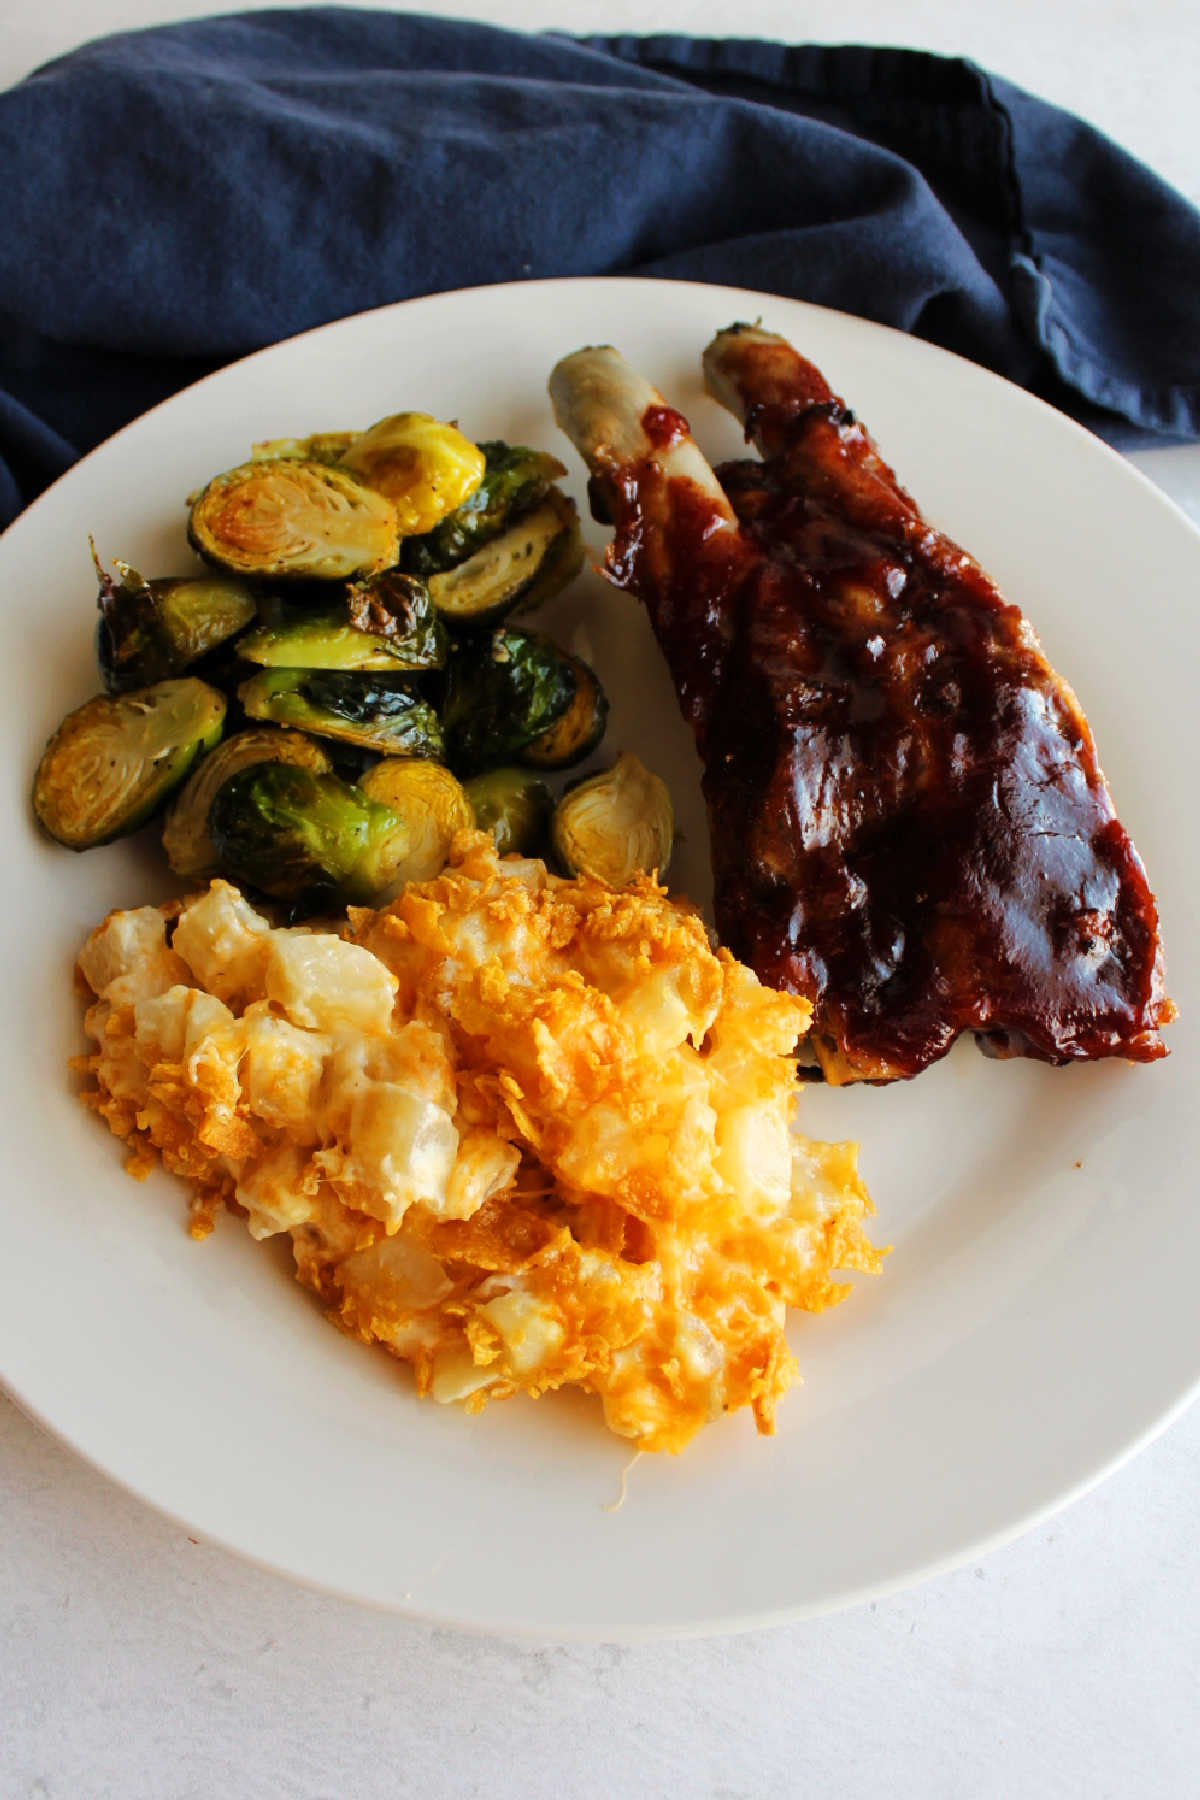 Dinner plate filled with cheddar ranch potato casserole, brussels sprouts and bbq ribs ready to eat. 